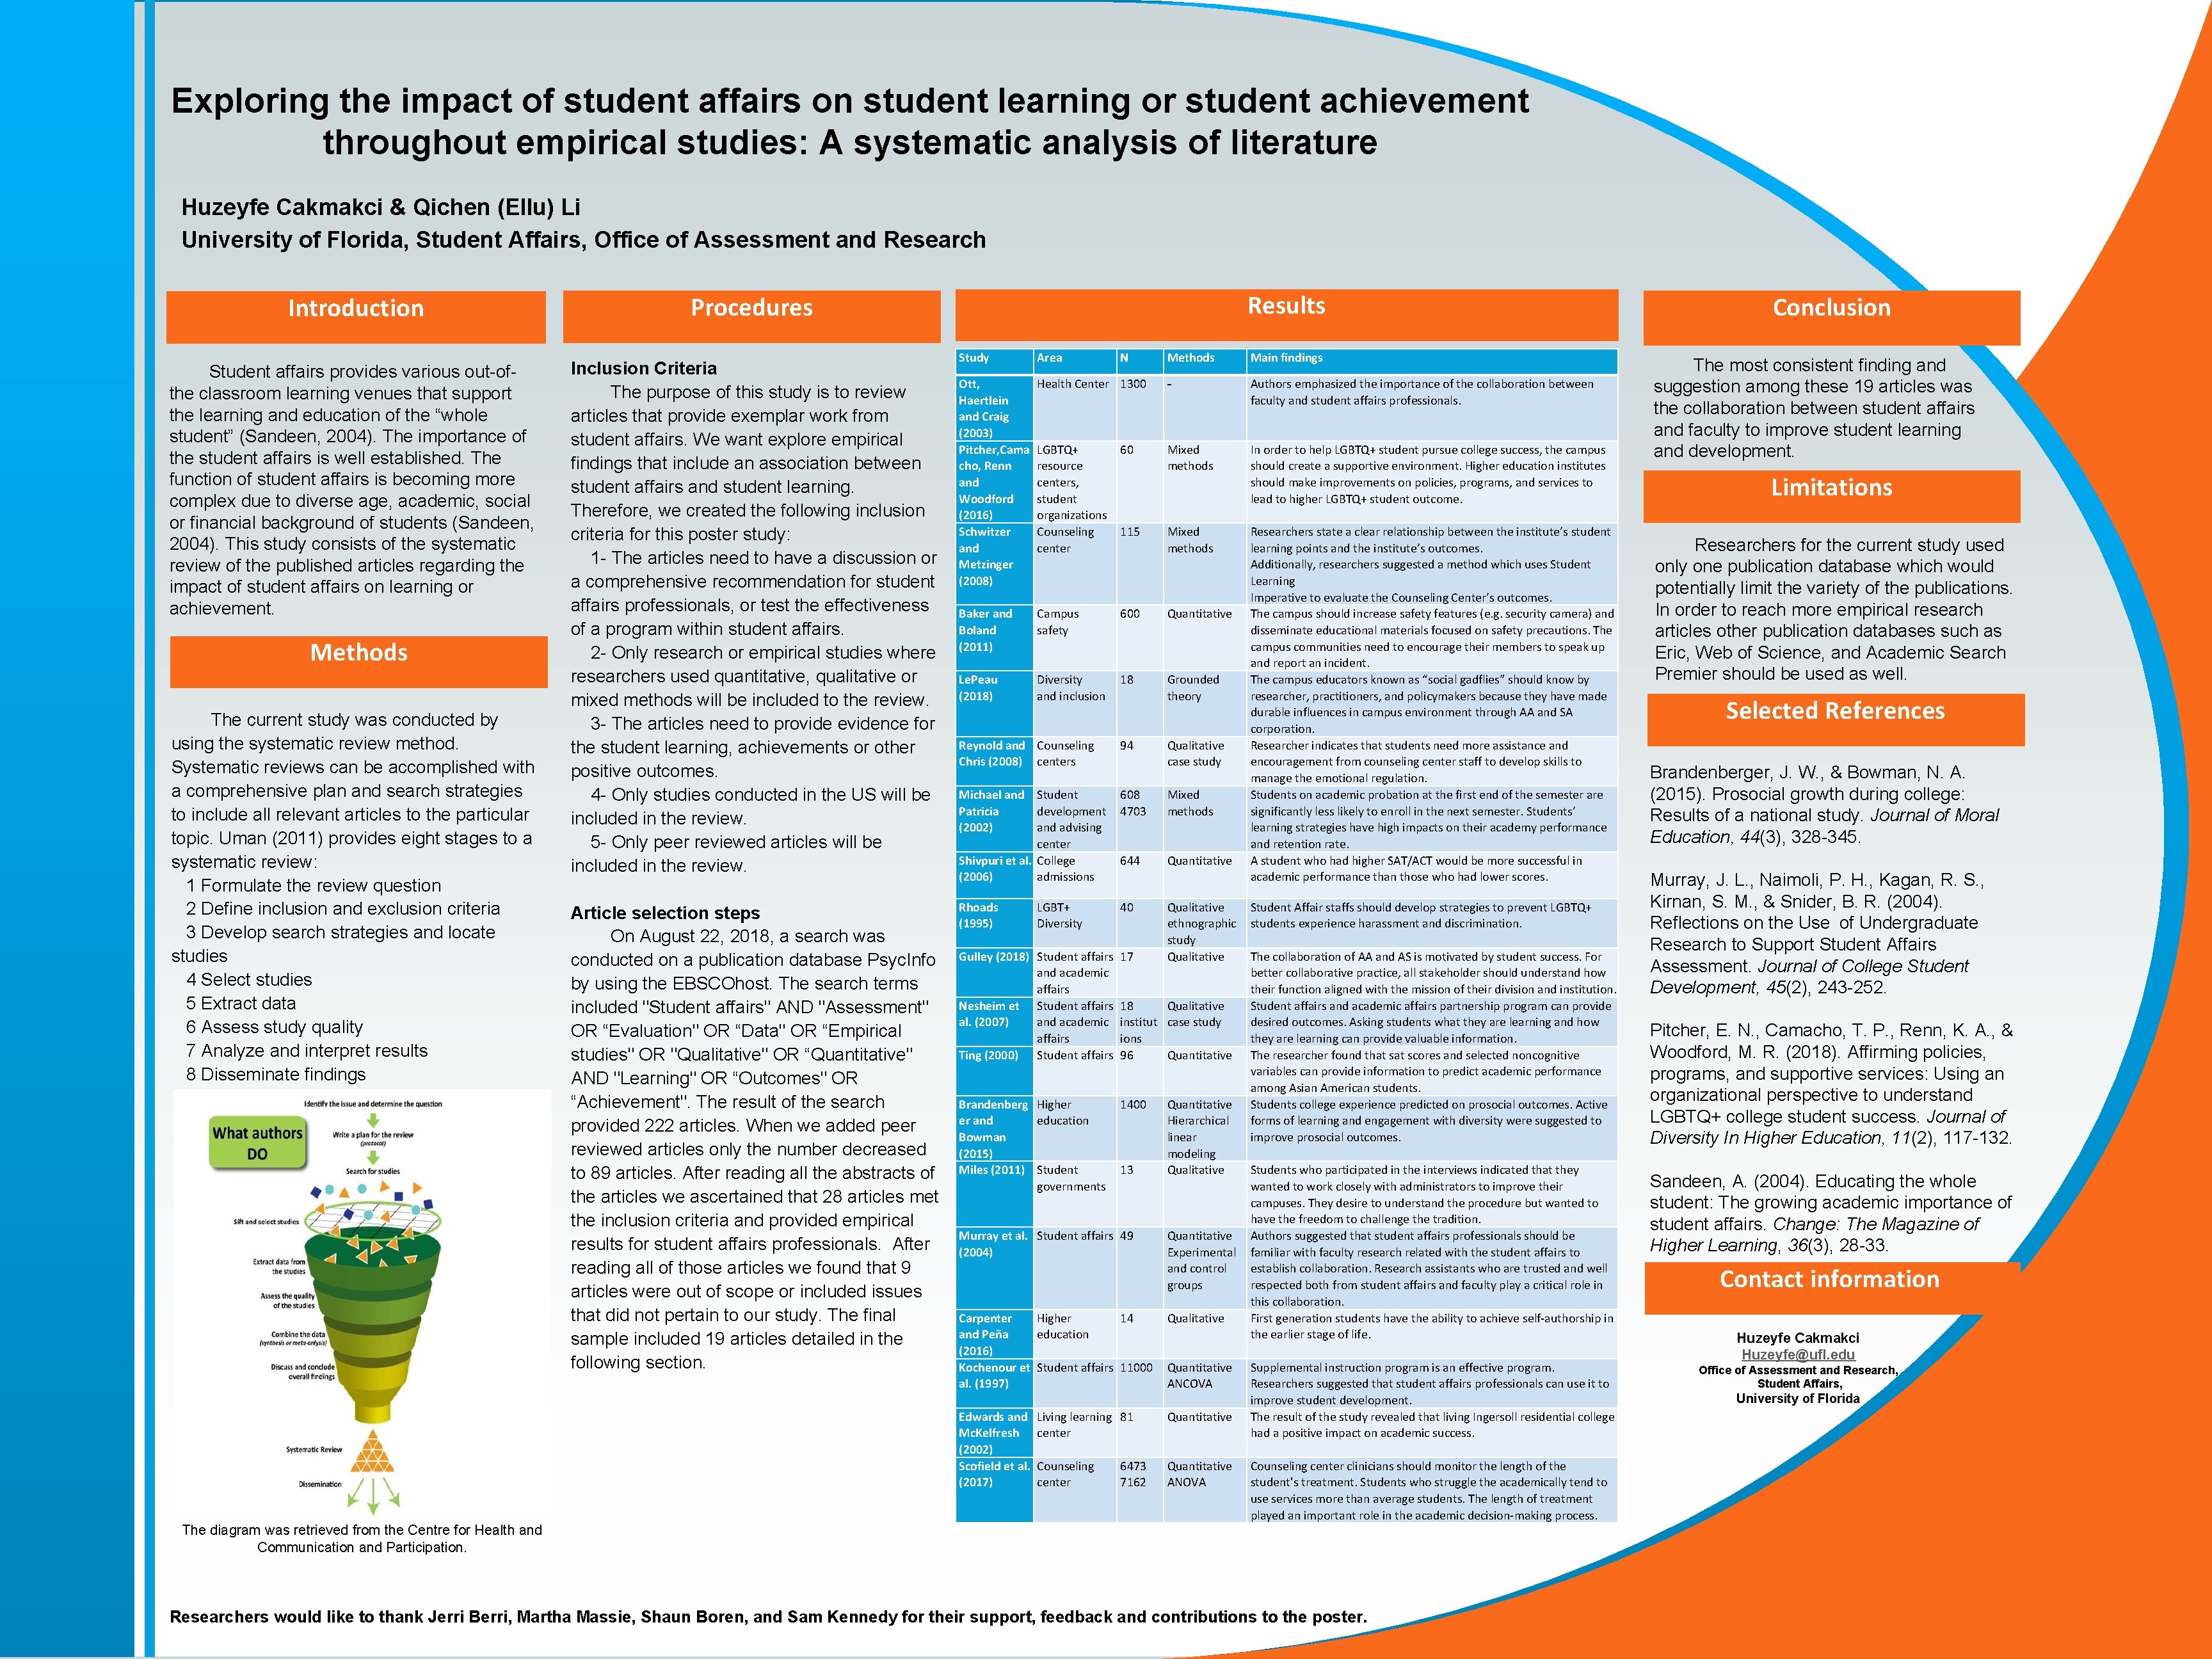 Exploring the impact of student affairs on student learning or student achievement throughout empirical